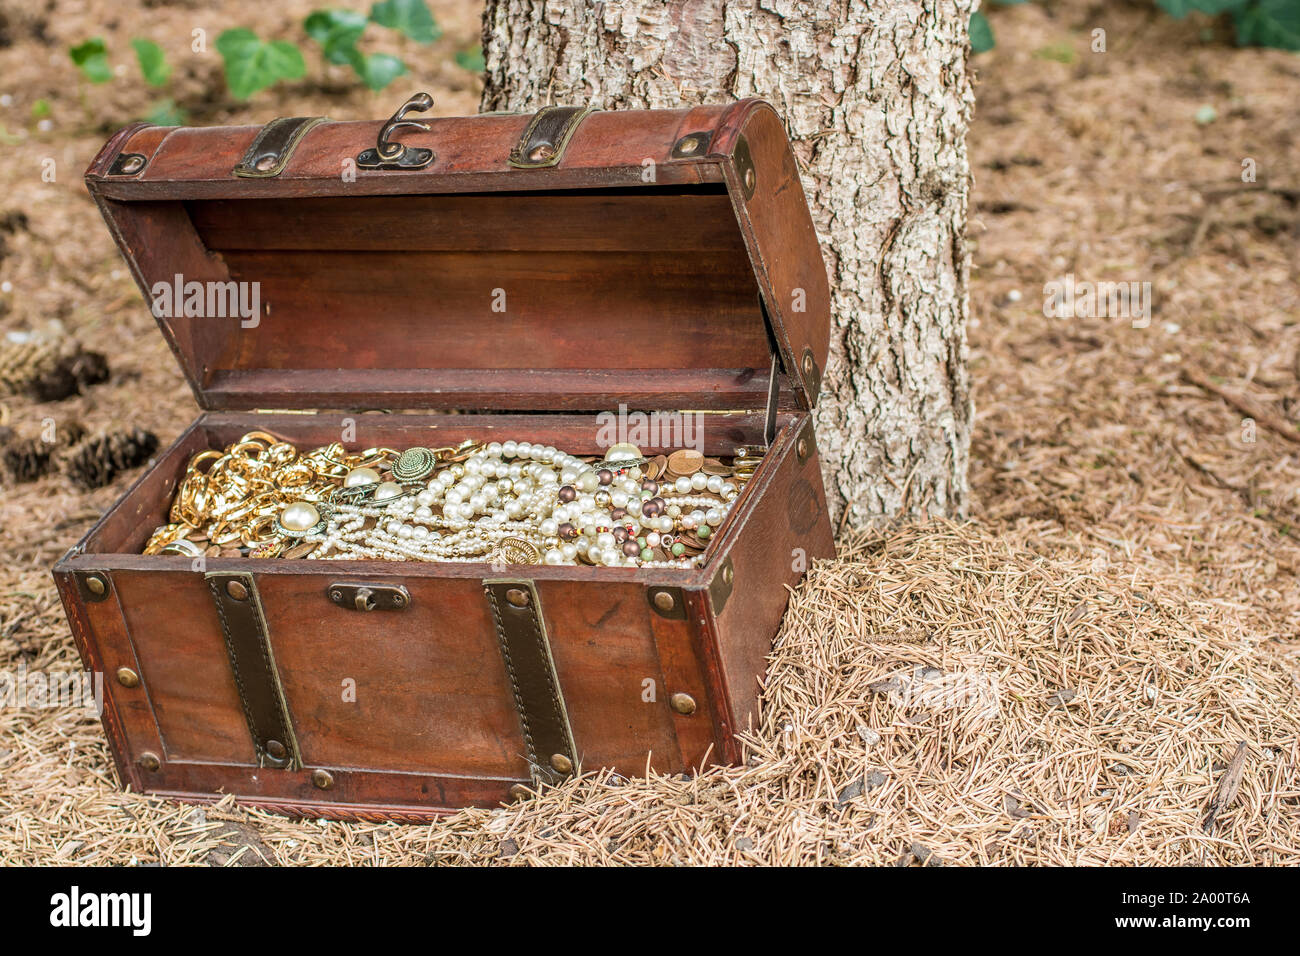 Treasure chest in the woods on the ground next to a tree Stock Photo